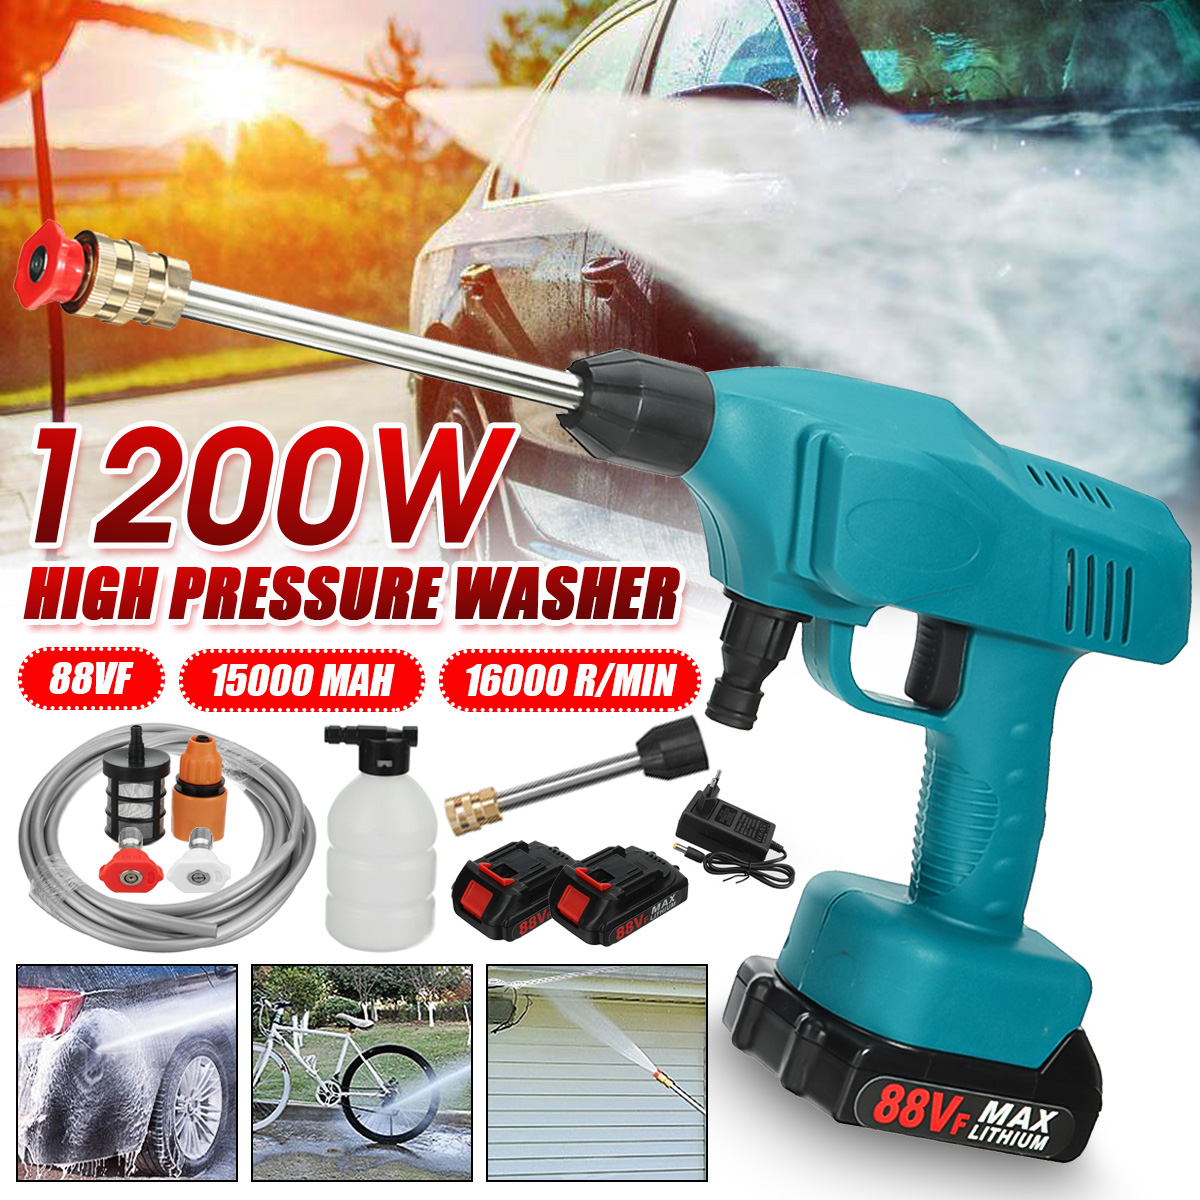 1200W-88VF-Portable-Cordless-Car-Washer-High-Pressure-Car-Household-Washer-Cleaner-Guns-Pumps-Tool-F-1891057-3